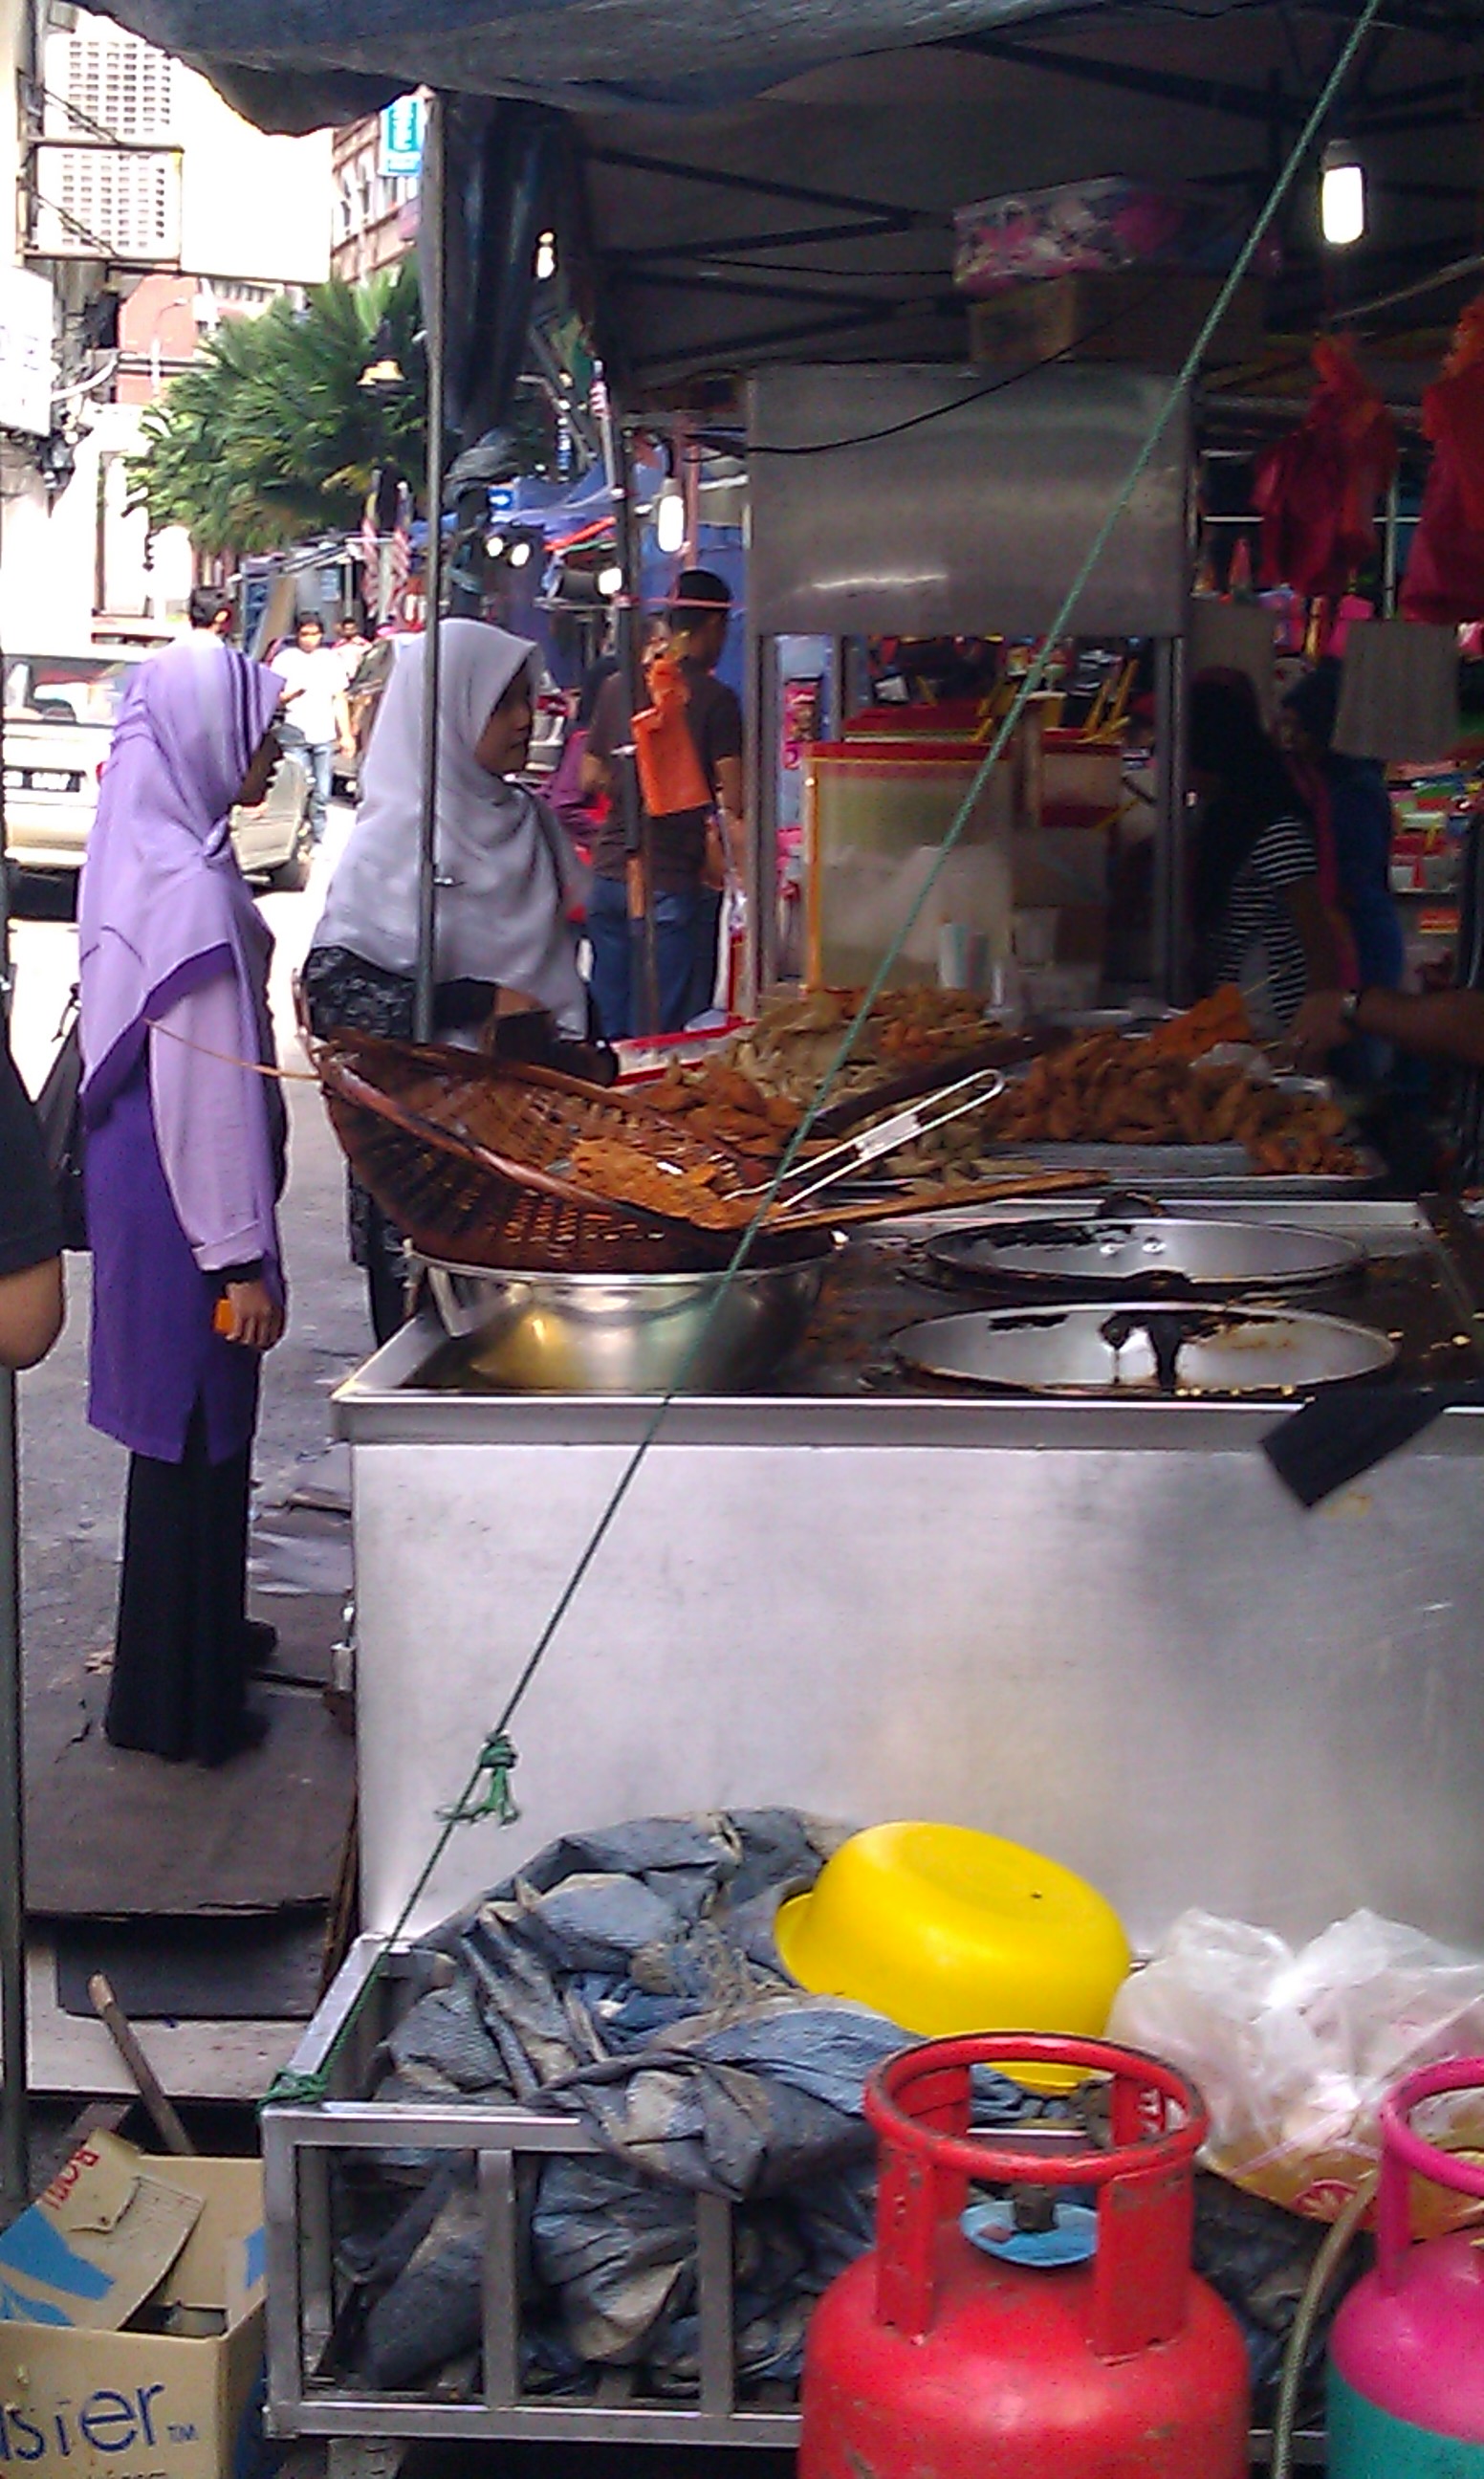 Food Market near Jalan India Mosque - looks delicious!